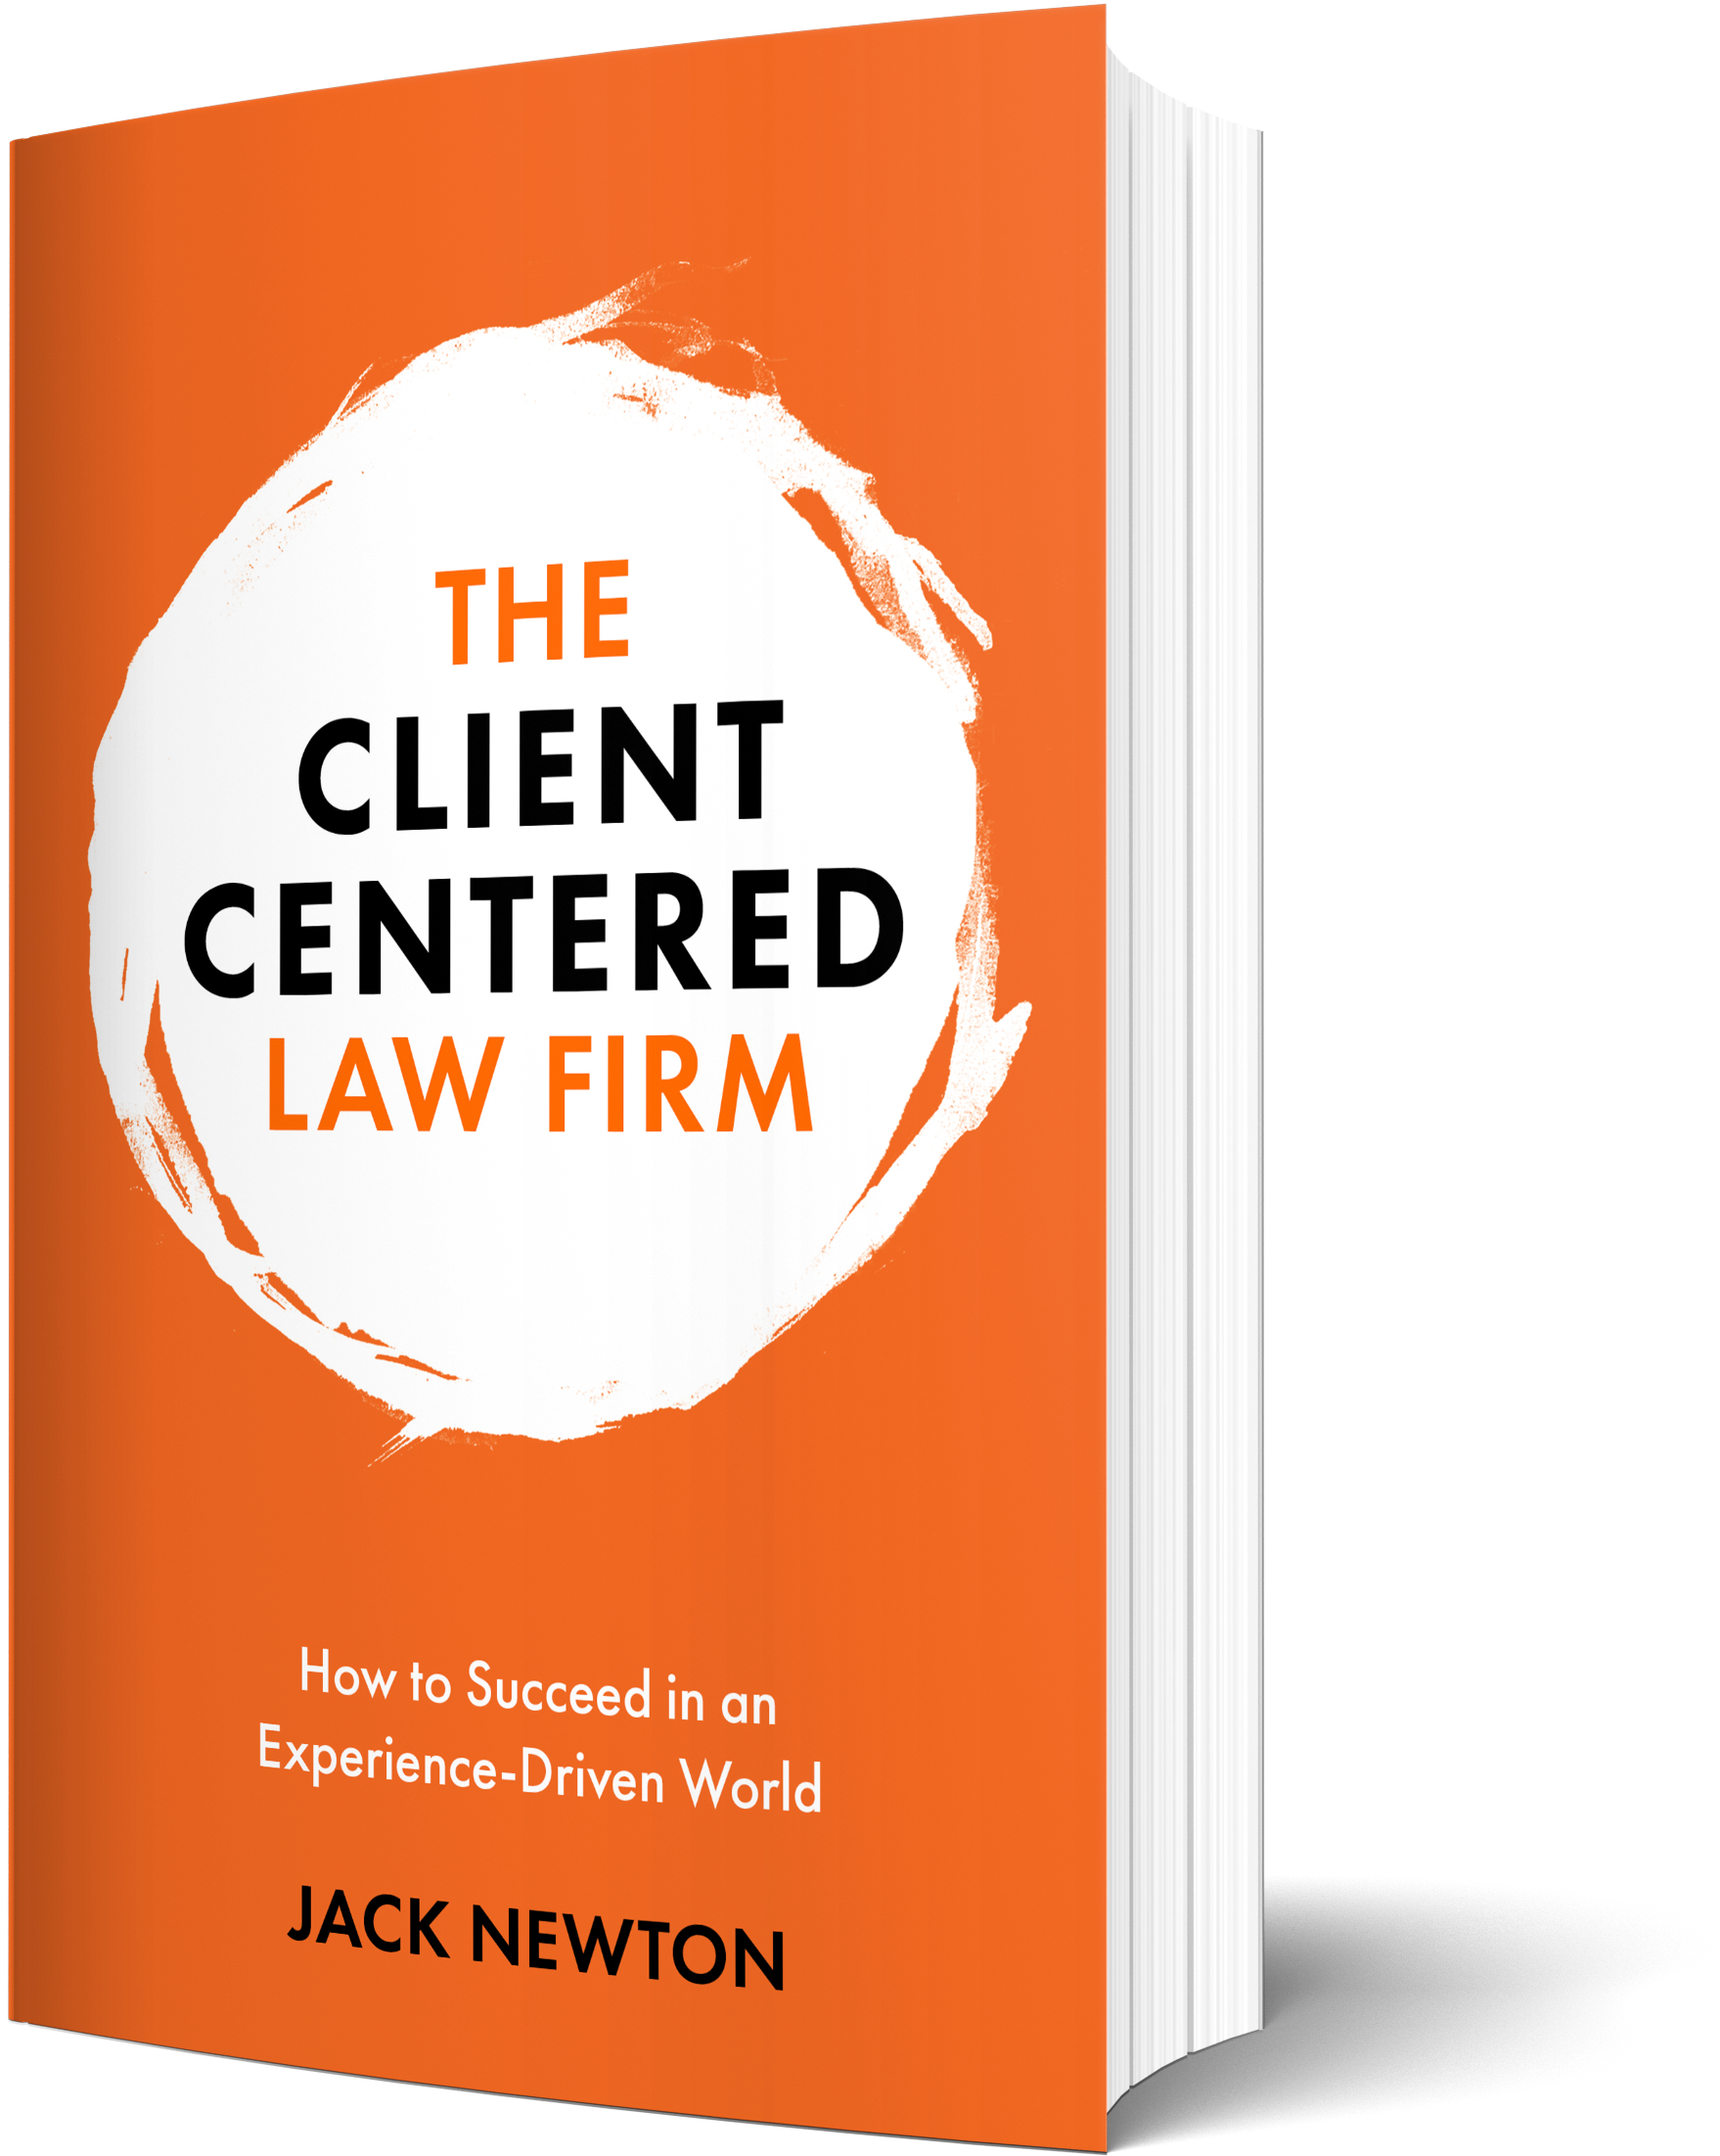 Early reviews of The Client-Centered Law Firm (pictured) have pegged the book as an essential read for legal professionals, with Bob Ambrogi, Publisher and Editor-in-Chief, LawSitesBlog.com and LexBlog.com stating, "In the age of Amazon and Uber, the lesson for law firms is that experience matters – not just legal experience, but also the experience you provide your clients. Drawing on his own experience as founder and CEO of one of the legal industry’s most-successful companies, Jack Newton provides a practical blueprint for building a client-centered law firm, making the case for why it matters through data and examples, and then guiding you through the process of redesigning your own firm and measuring success." 